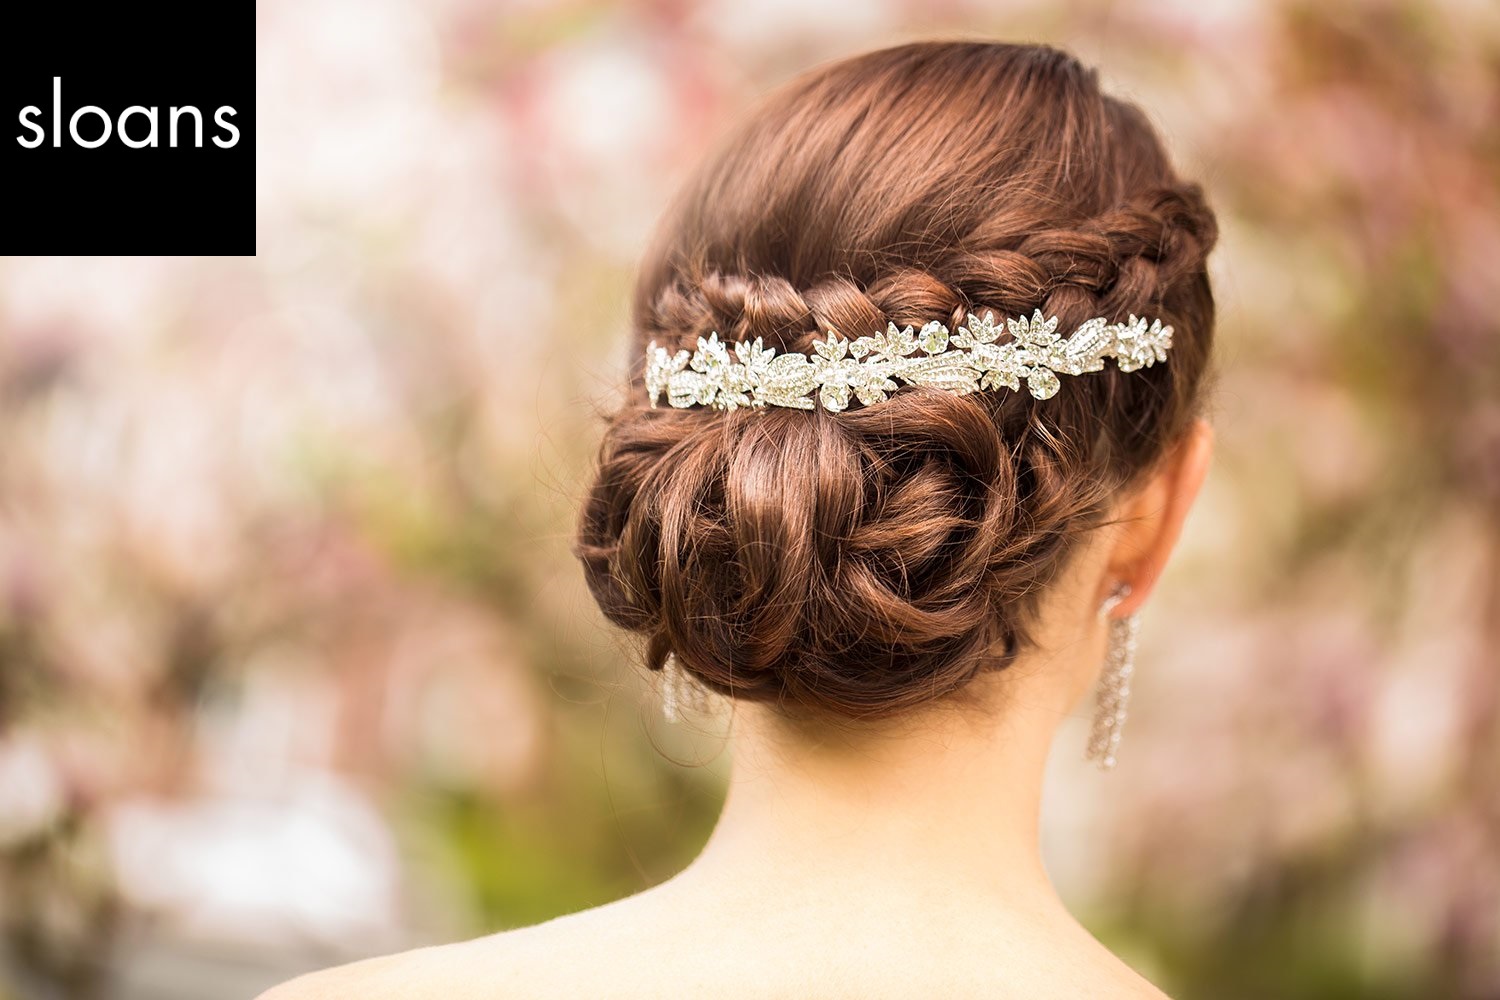 Effortlessly Elegant: Tips And Tricks For Achieving The Ideal Wedding Hair